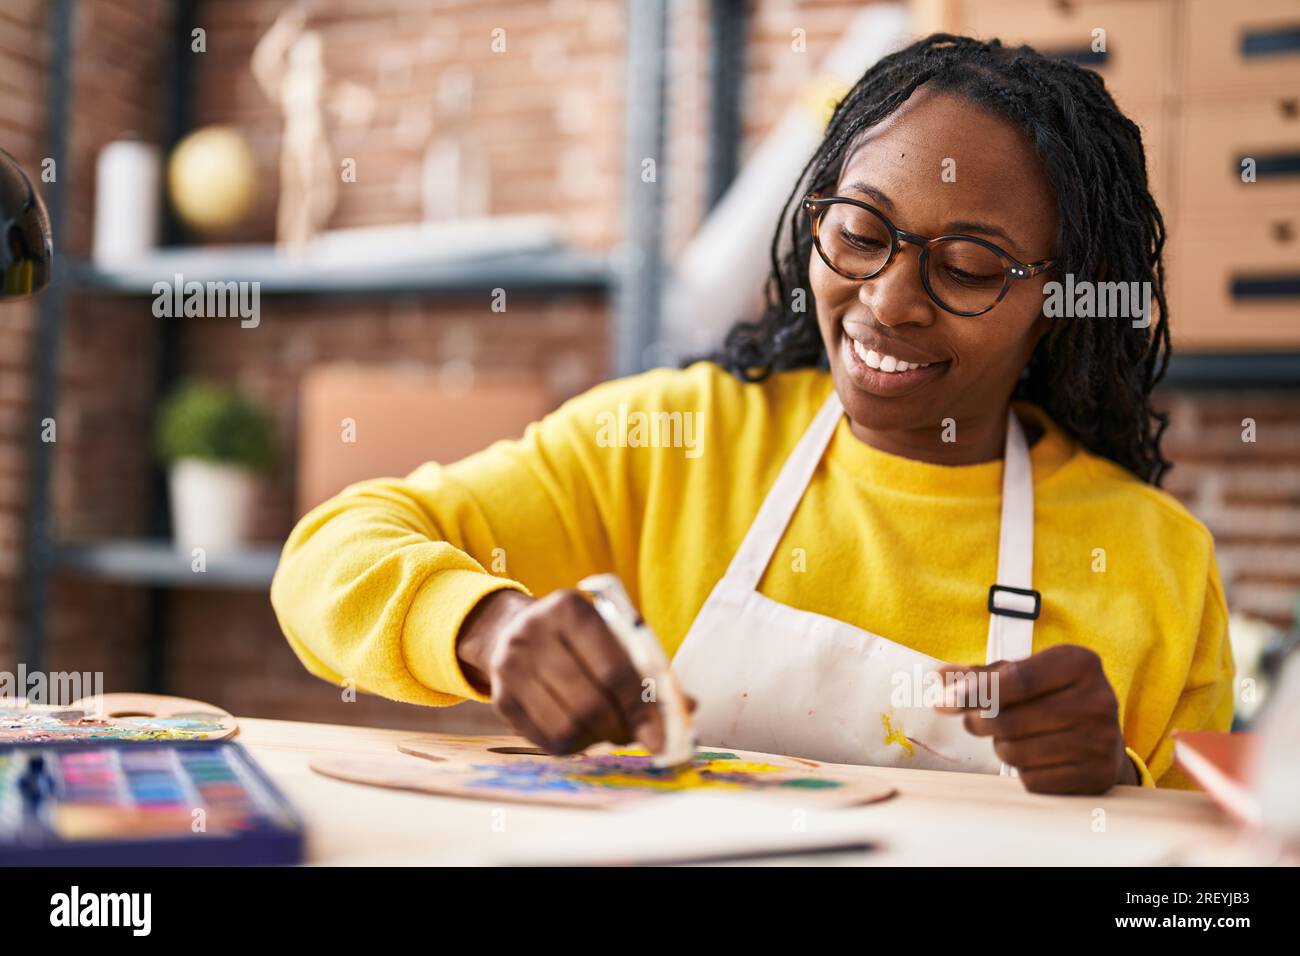 African american woman artist smiling confident mixing color at art studio Stock Photo